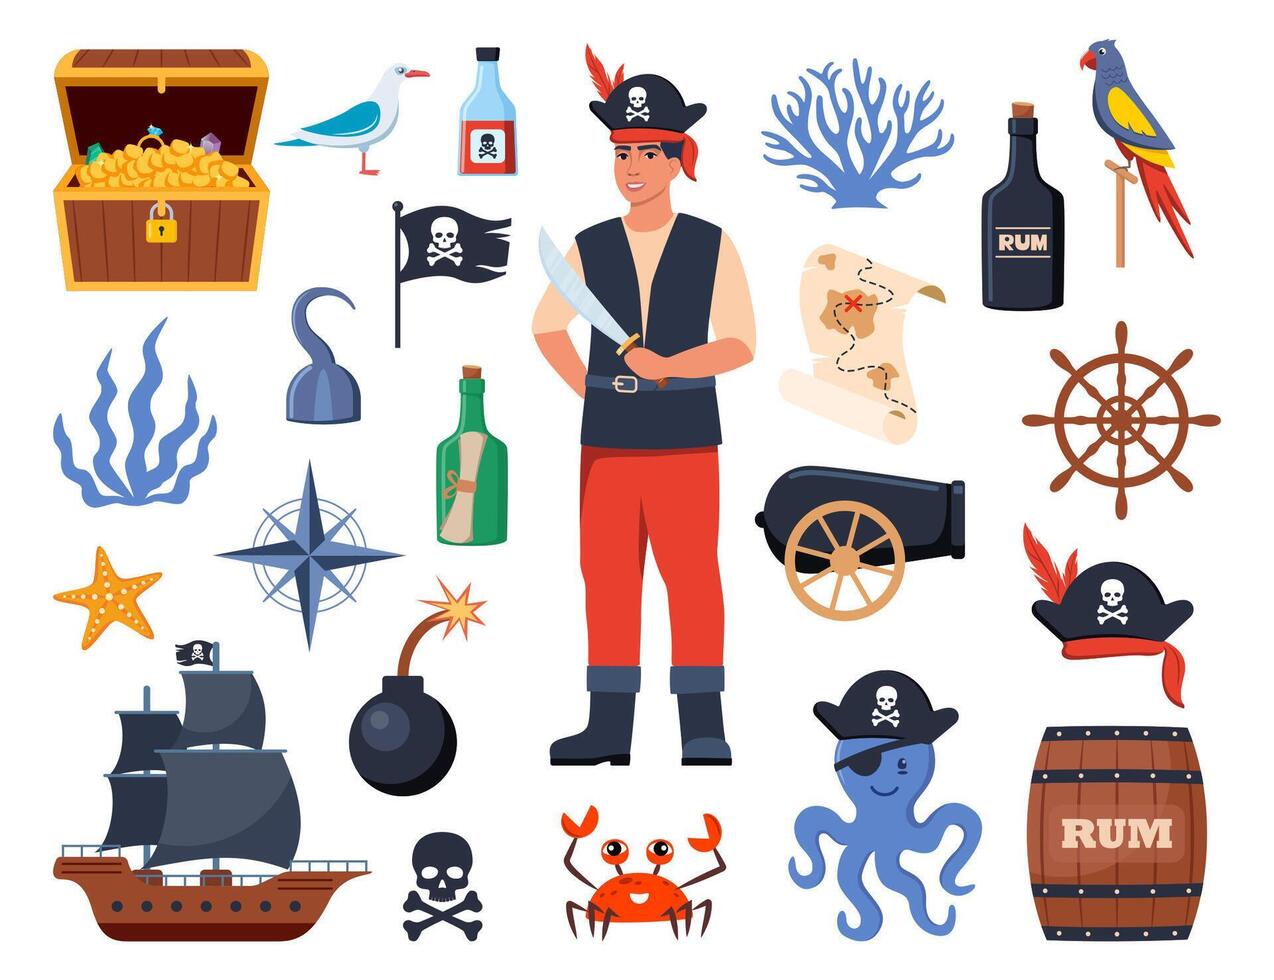 Pirate elements set. Pirates theme illustrations with ship, captain, chest, map, parrot, rum, cannonball. Funny pirate party icons. Vector illustration.